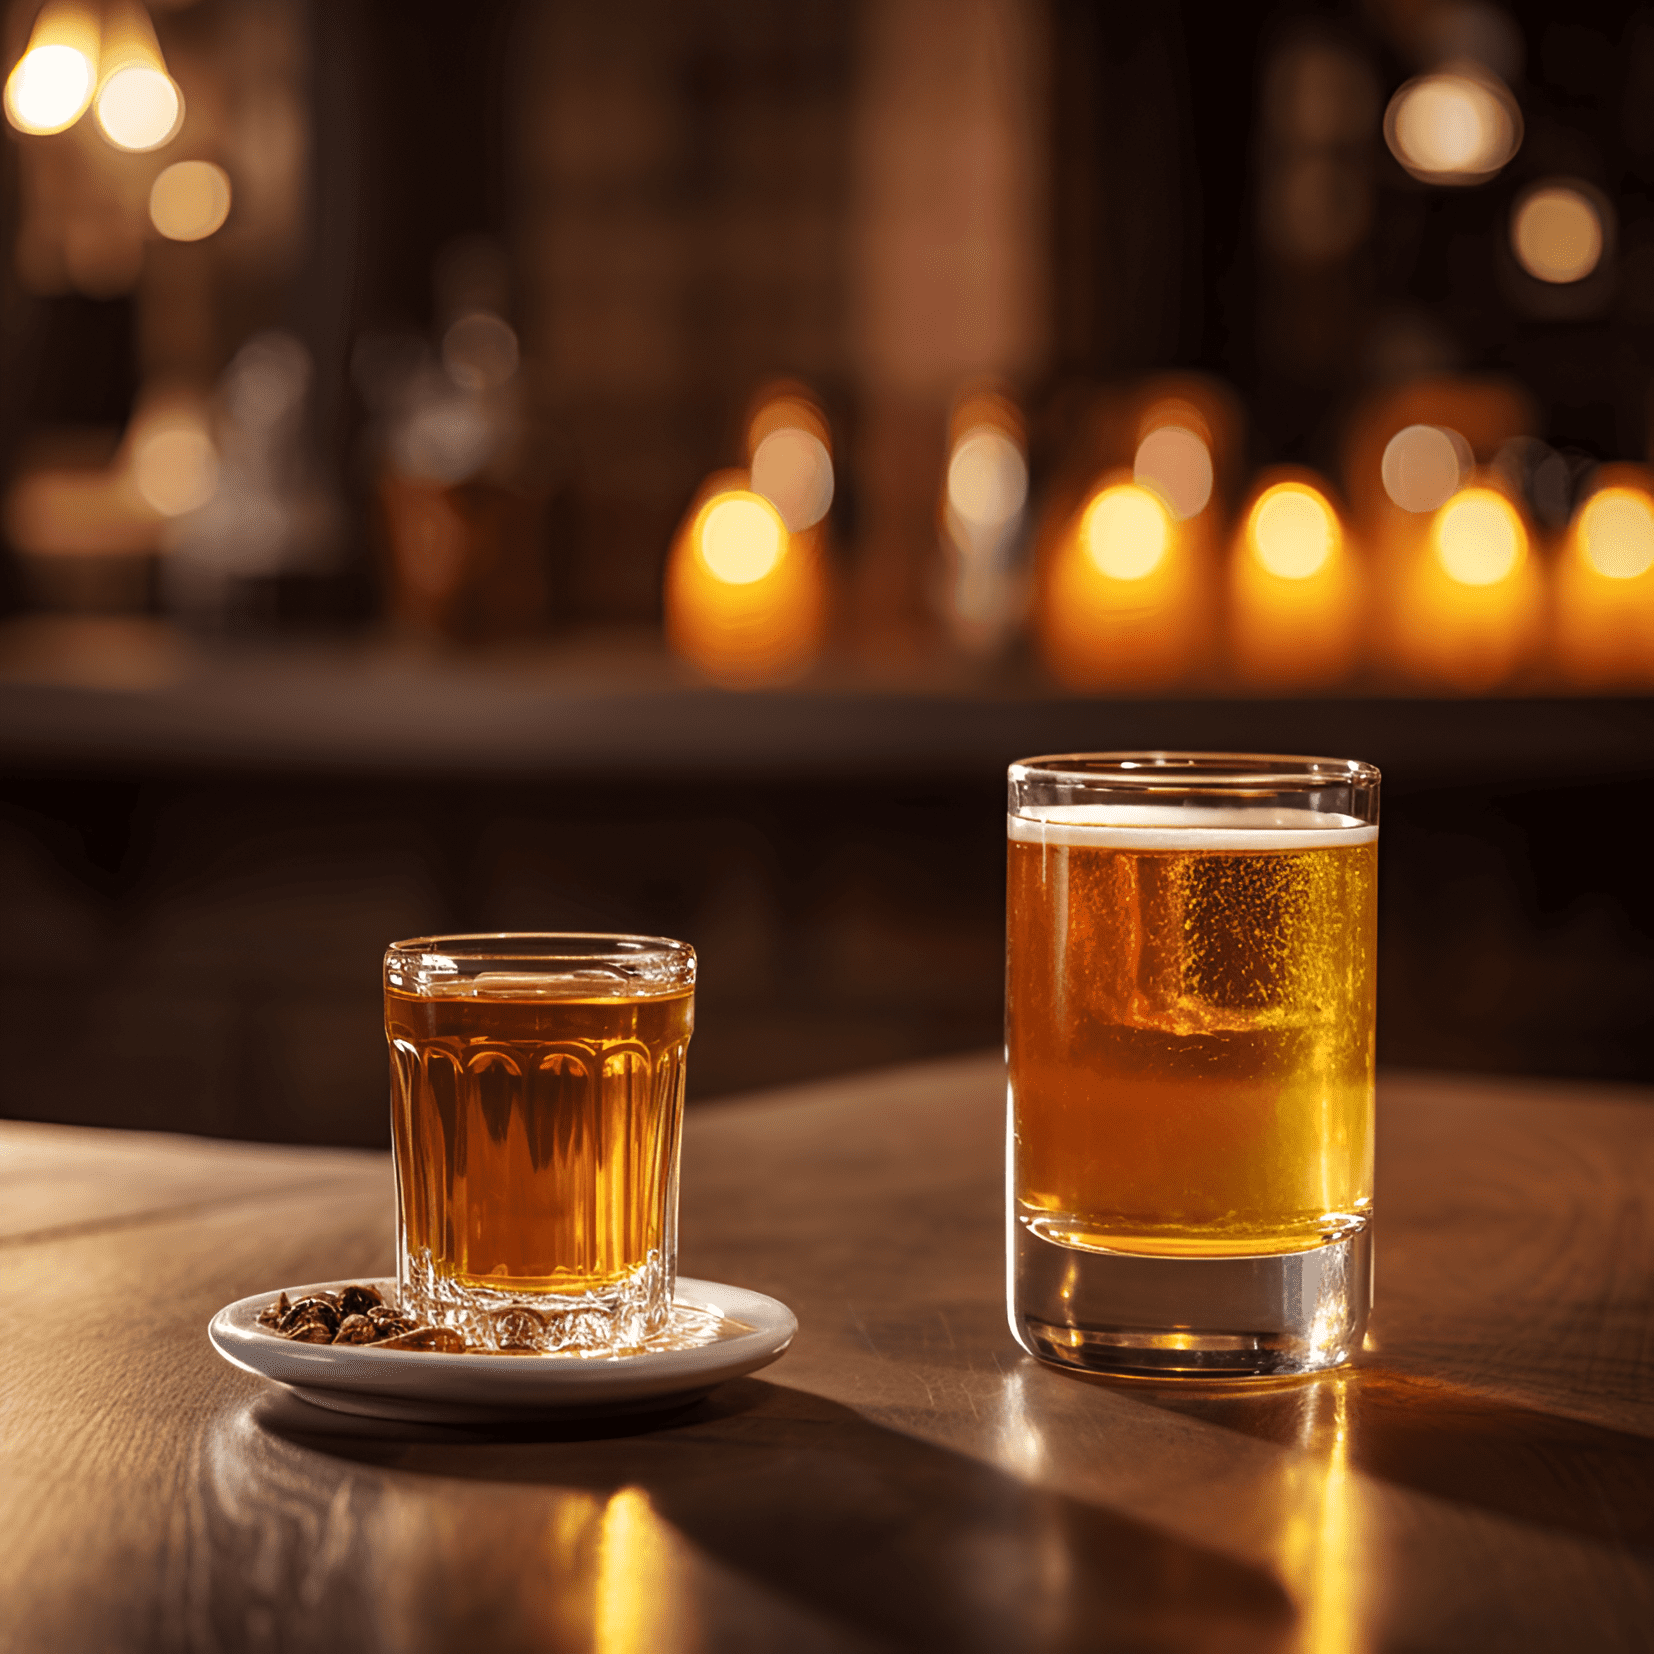 Boilermaker Cocktail Recipe - The Boilermaker is a strong, robust, and slightly bitter cocktail. The combination of whiskey and beer creates a bold and warming flavor, with the whiskey providing a smooth, rich taste and the beer adding a refreshing, slightly bitter note.